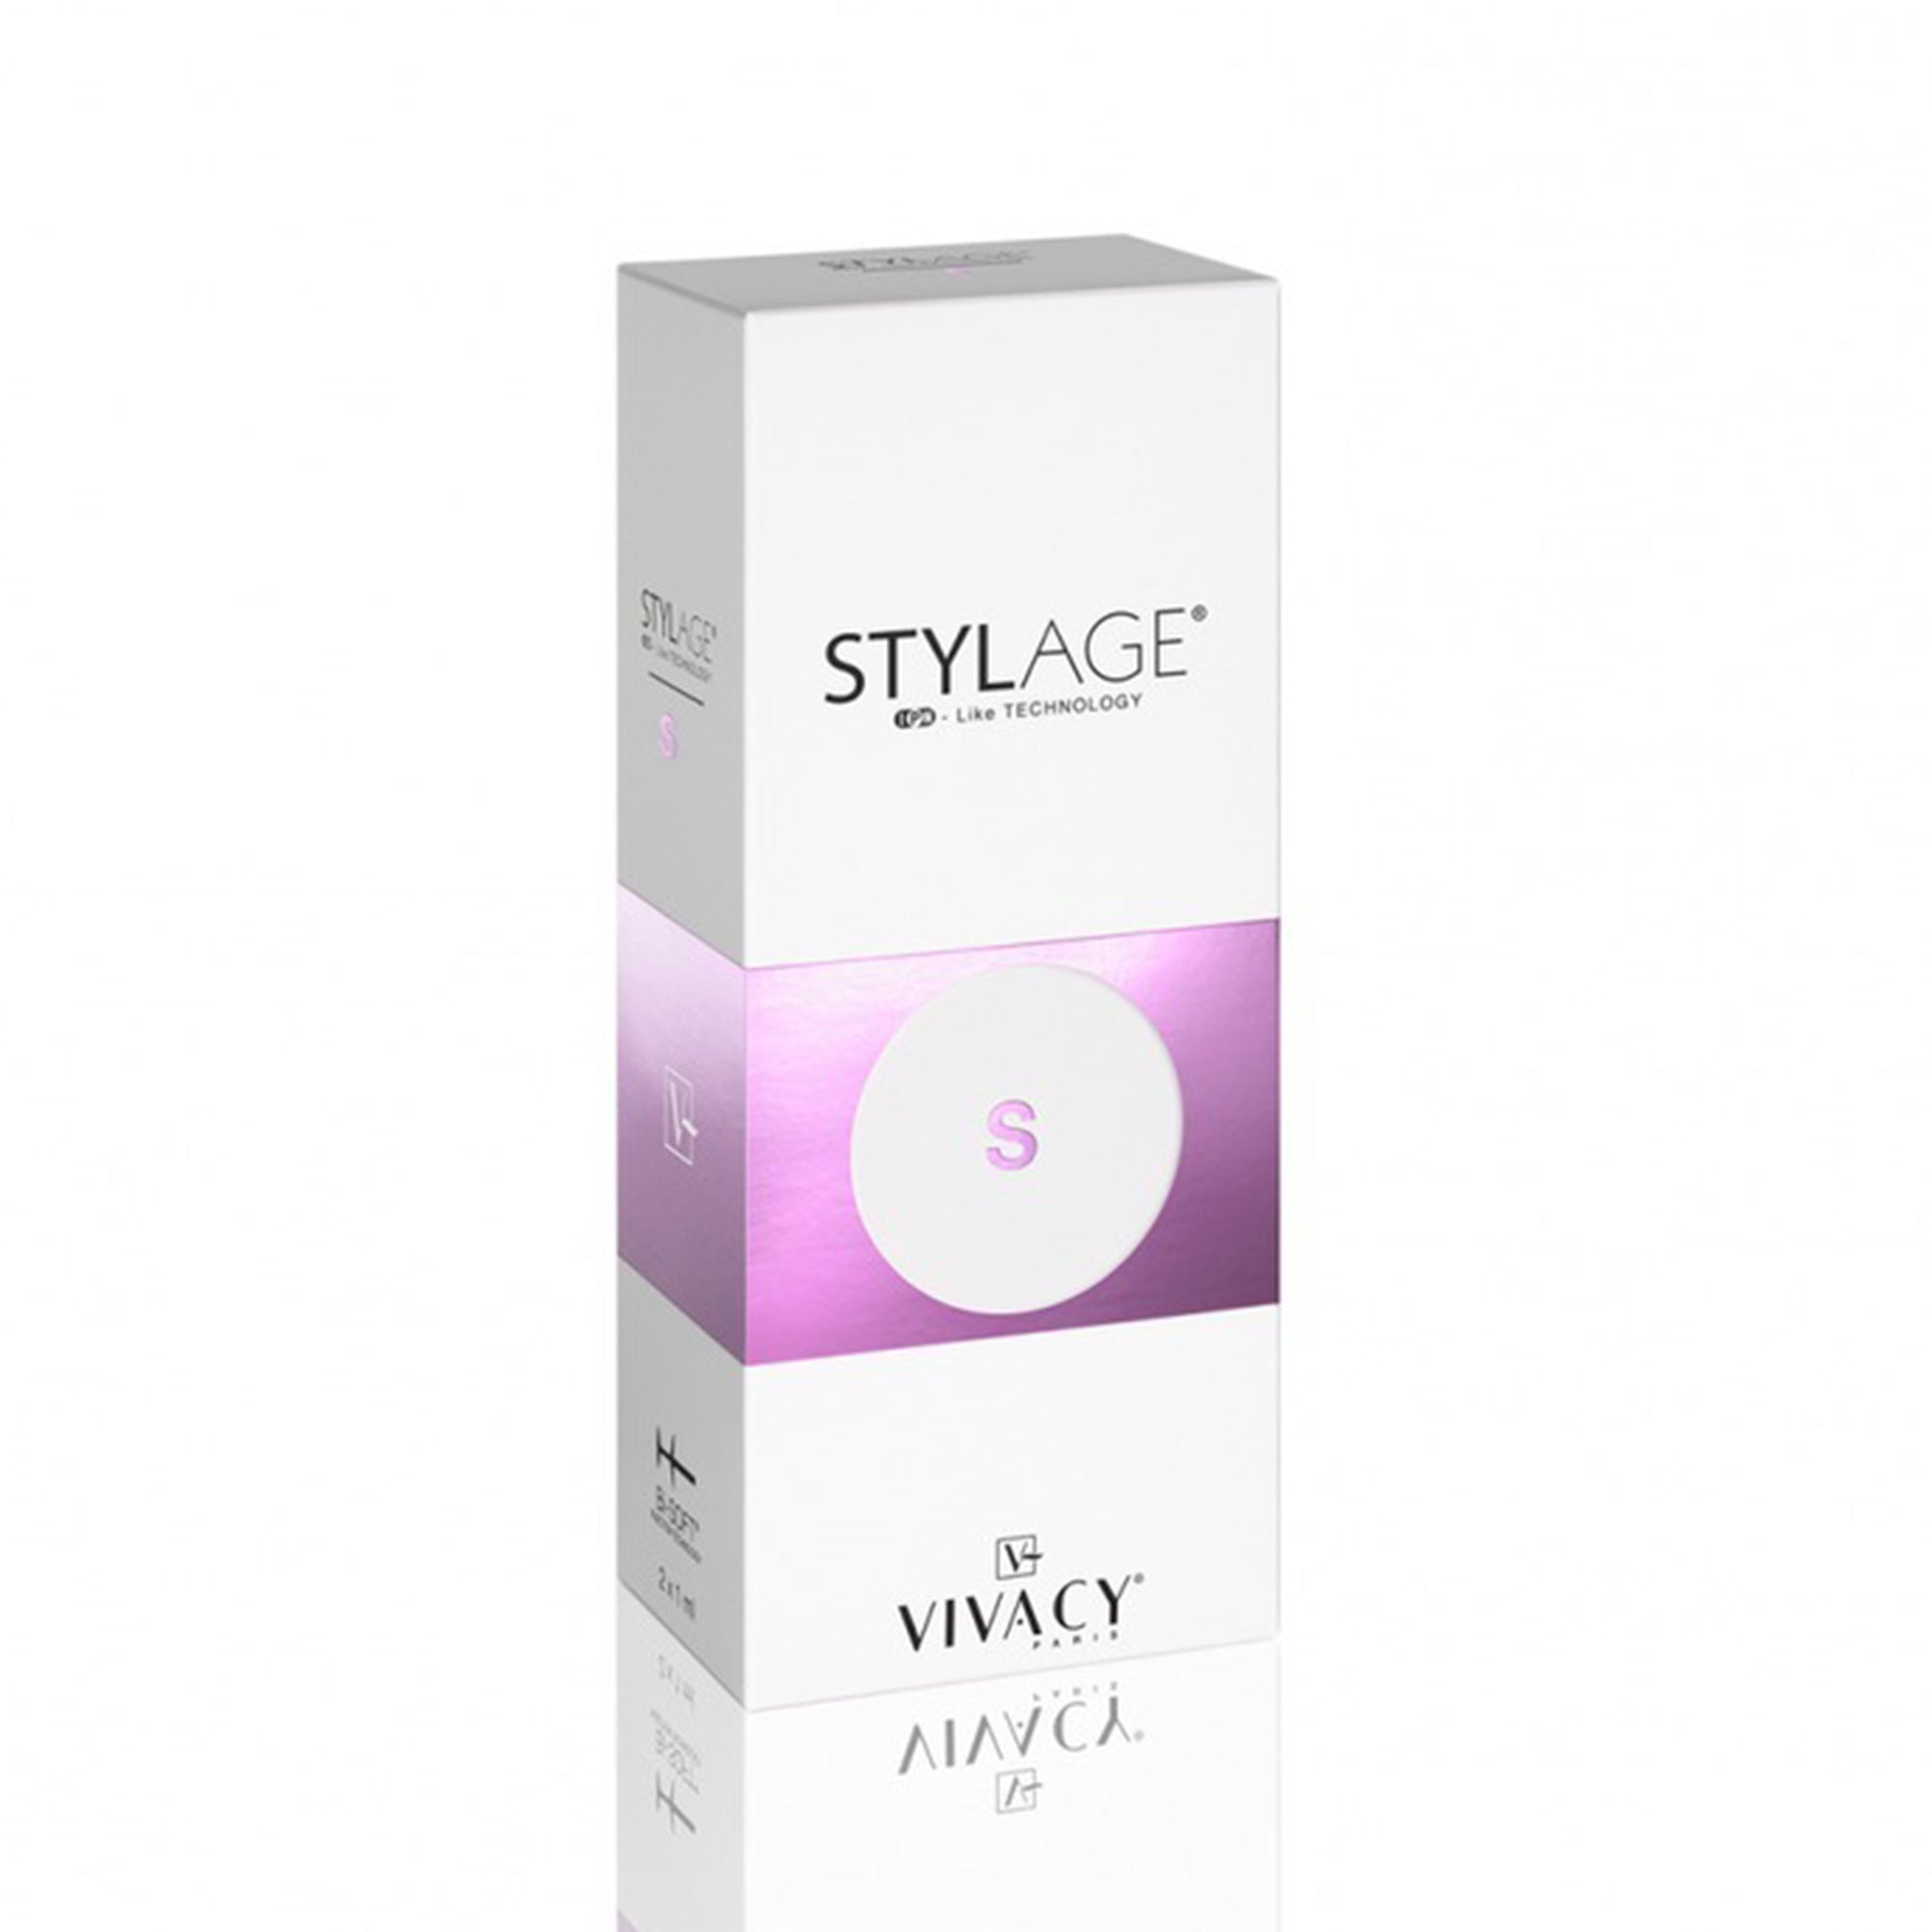 Vivacy Stylage m